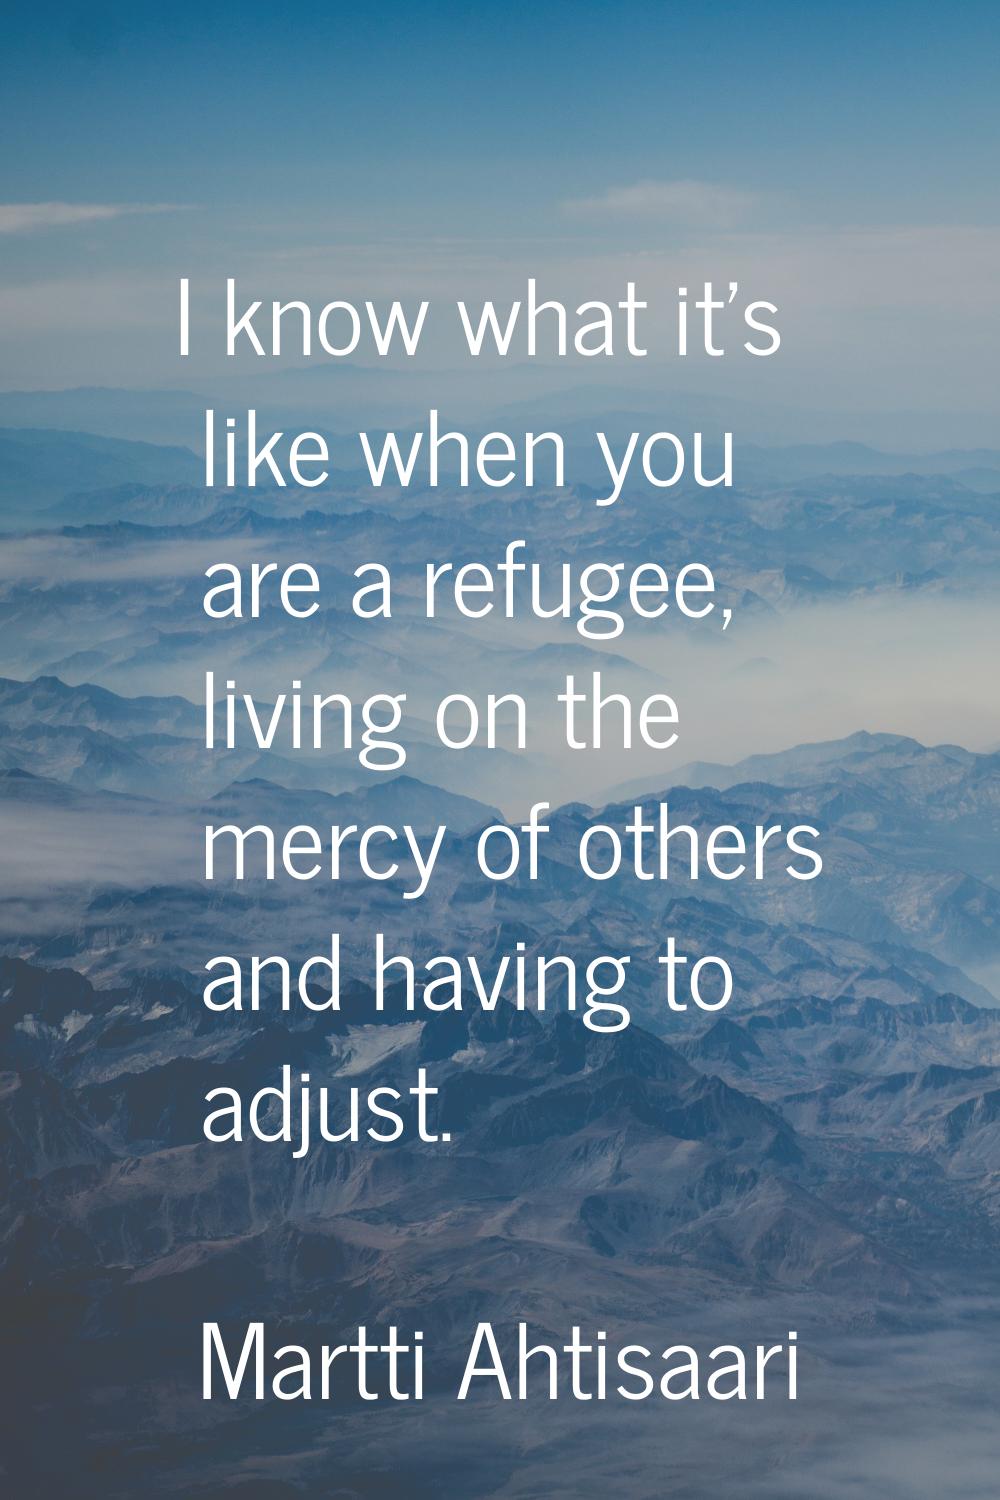 I know what it's like when you are a refugee, living on the mercy of others and having to adjust.